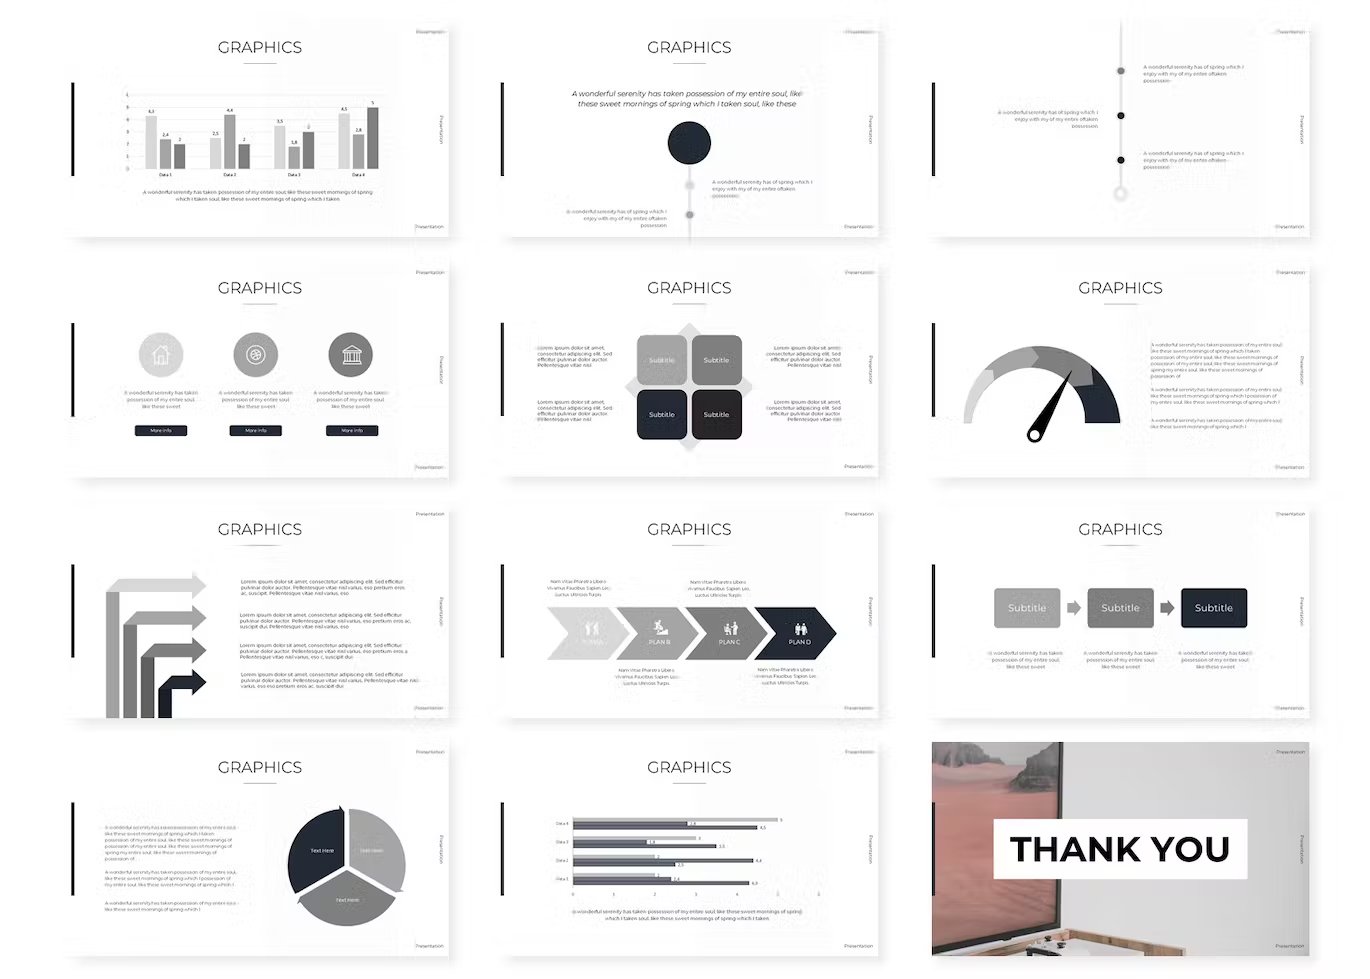 12 black and white charts and diagrams slides of the minim.